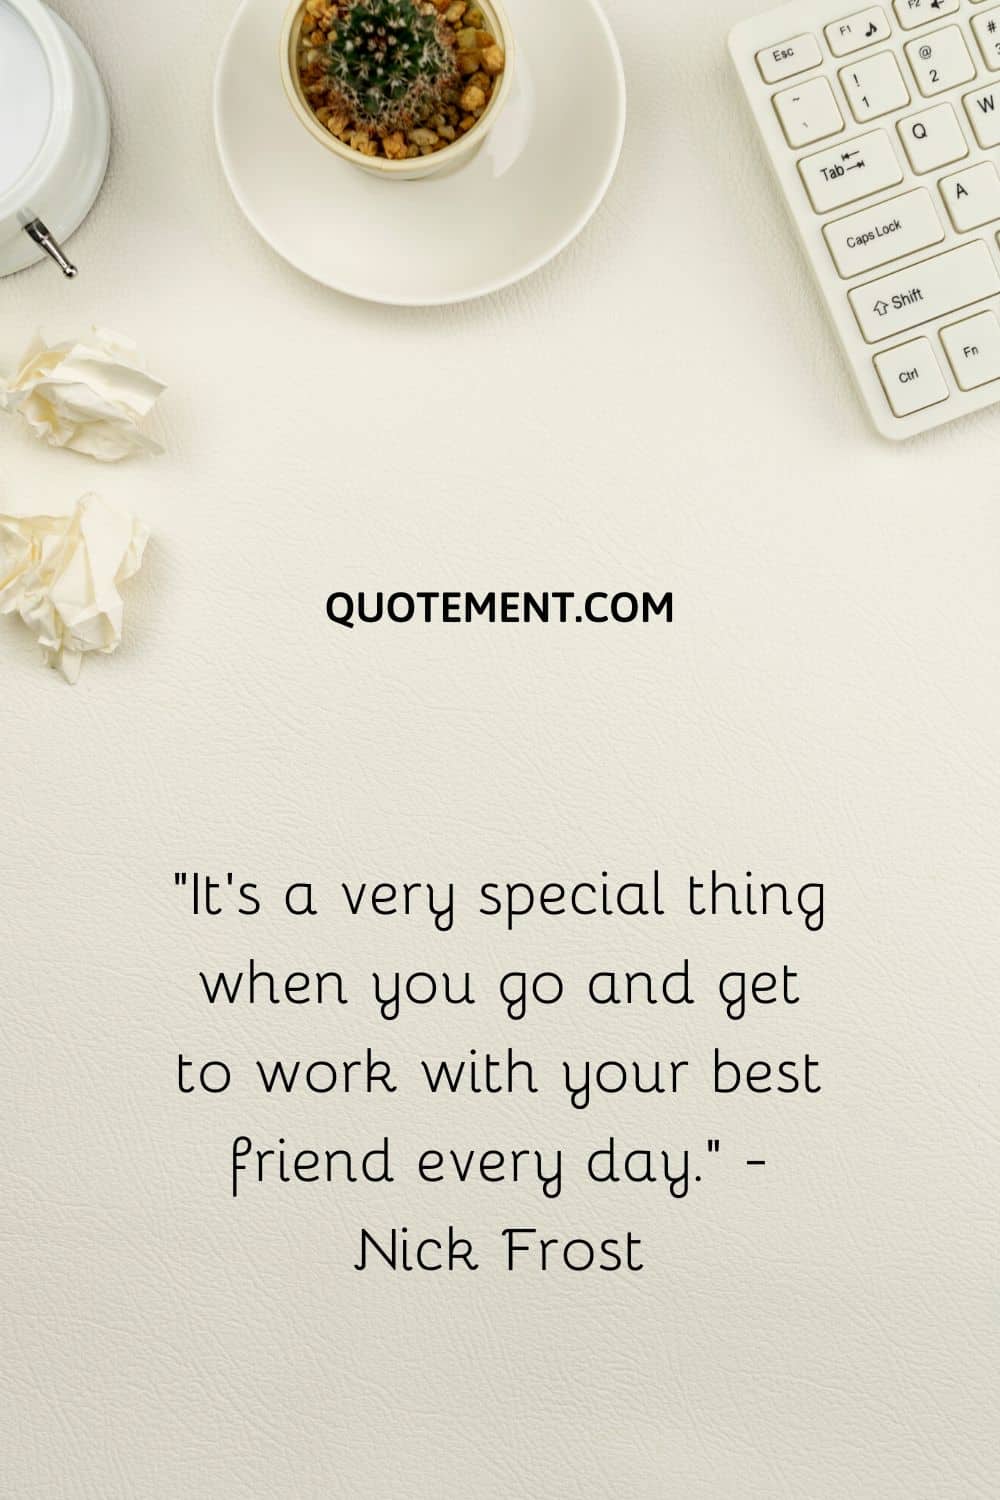 “It’s a very special thing when you go and get to work with your best friend every day.” - Nick Frost